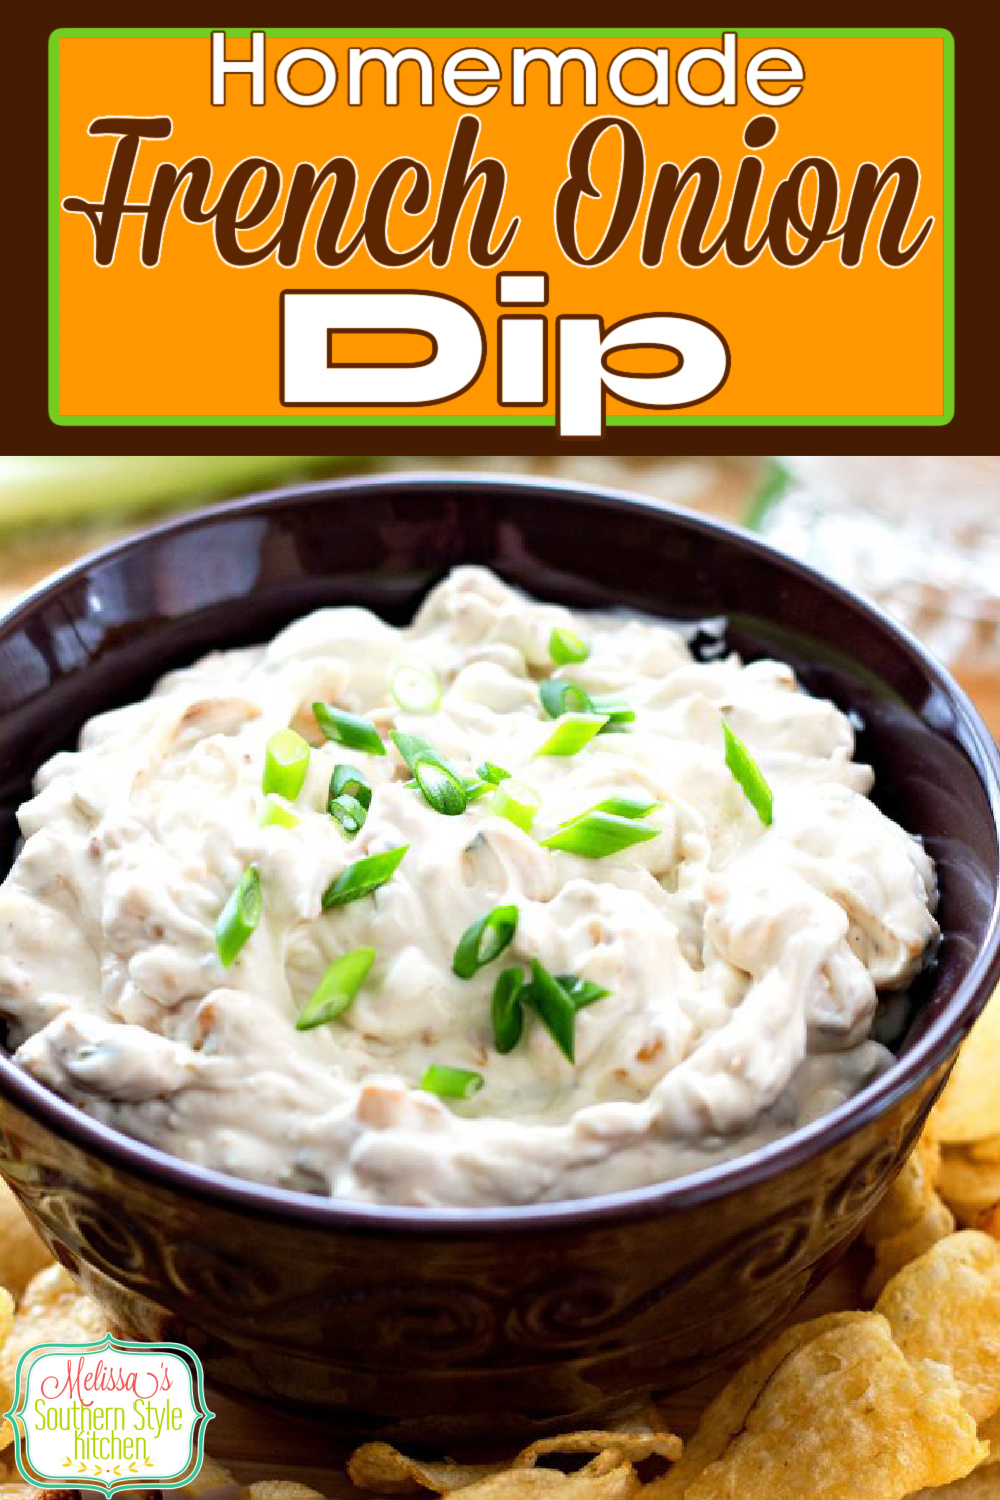 Get the party started with this scrumptious Homemade French Onion Dip #frenchoniondip #diprecipes #carmalizedoniondip #onions #appetizers #tailgating #holidayrecipes #southernfood #southernrecipes #oniondip #frenchonion #snacks via @melissasssk